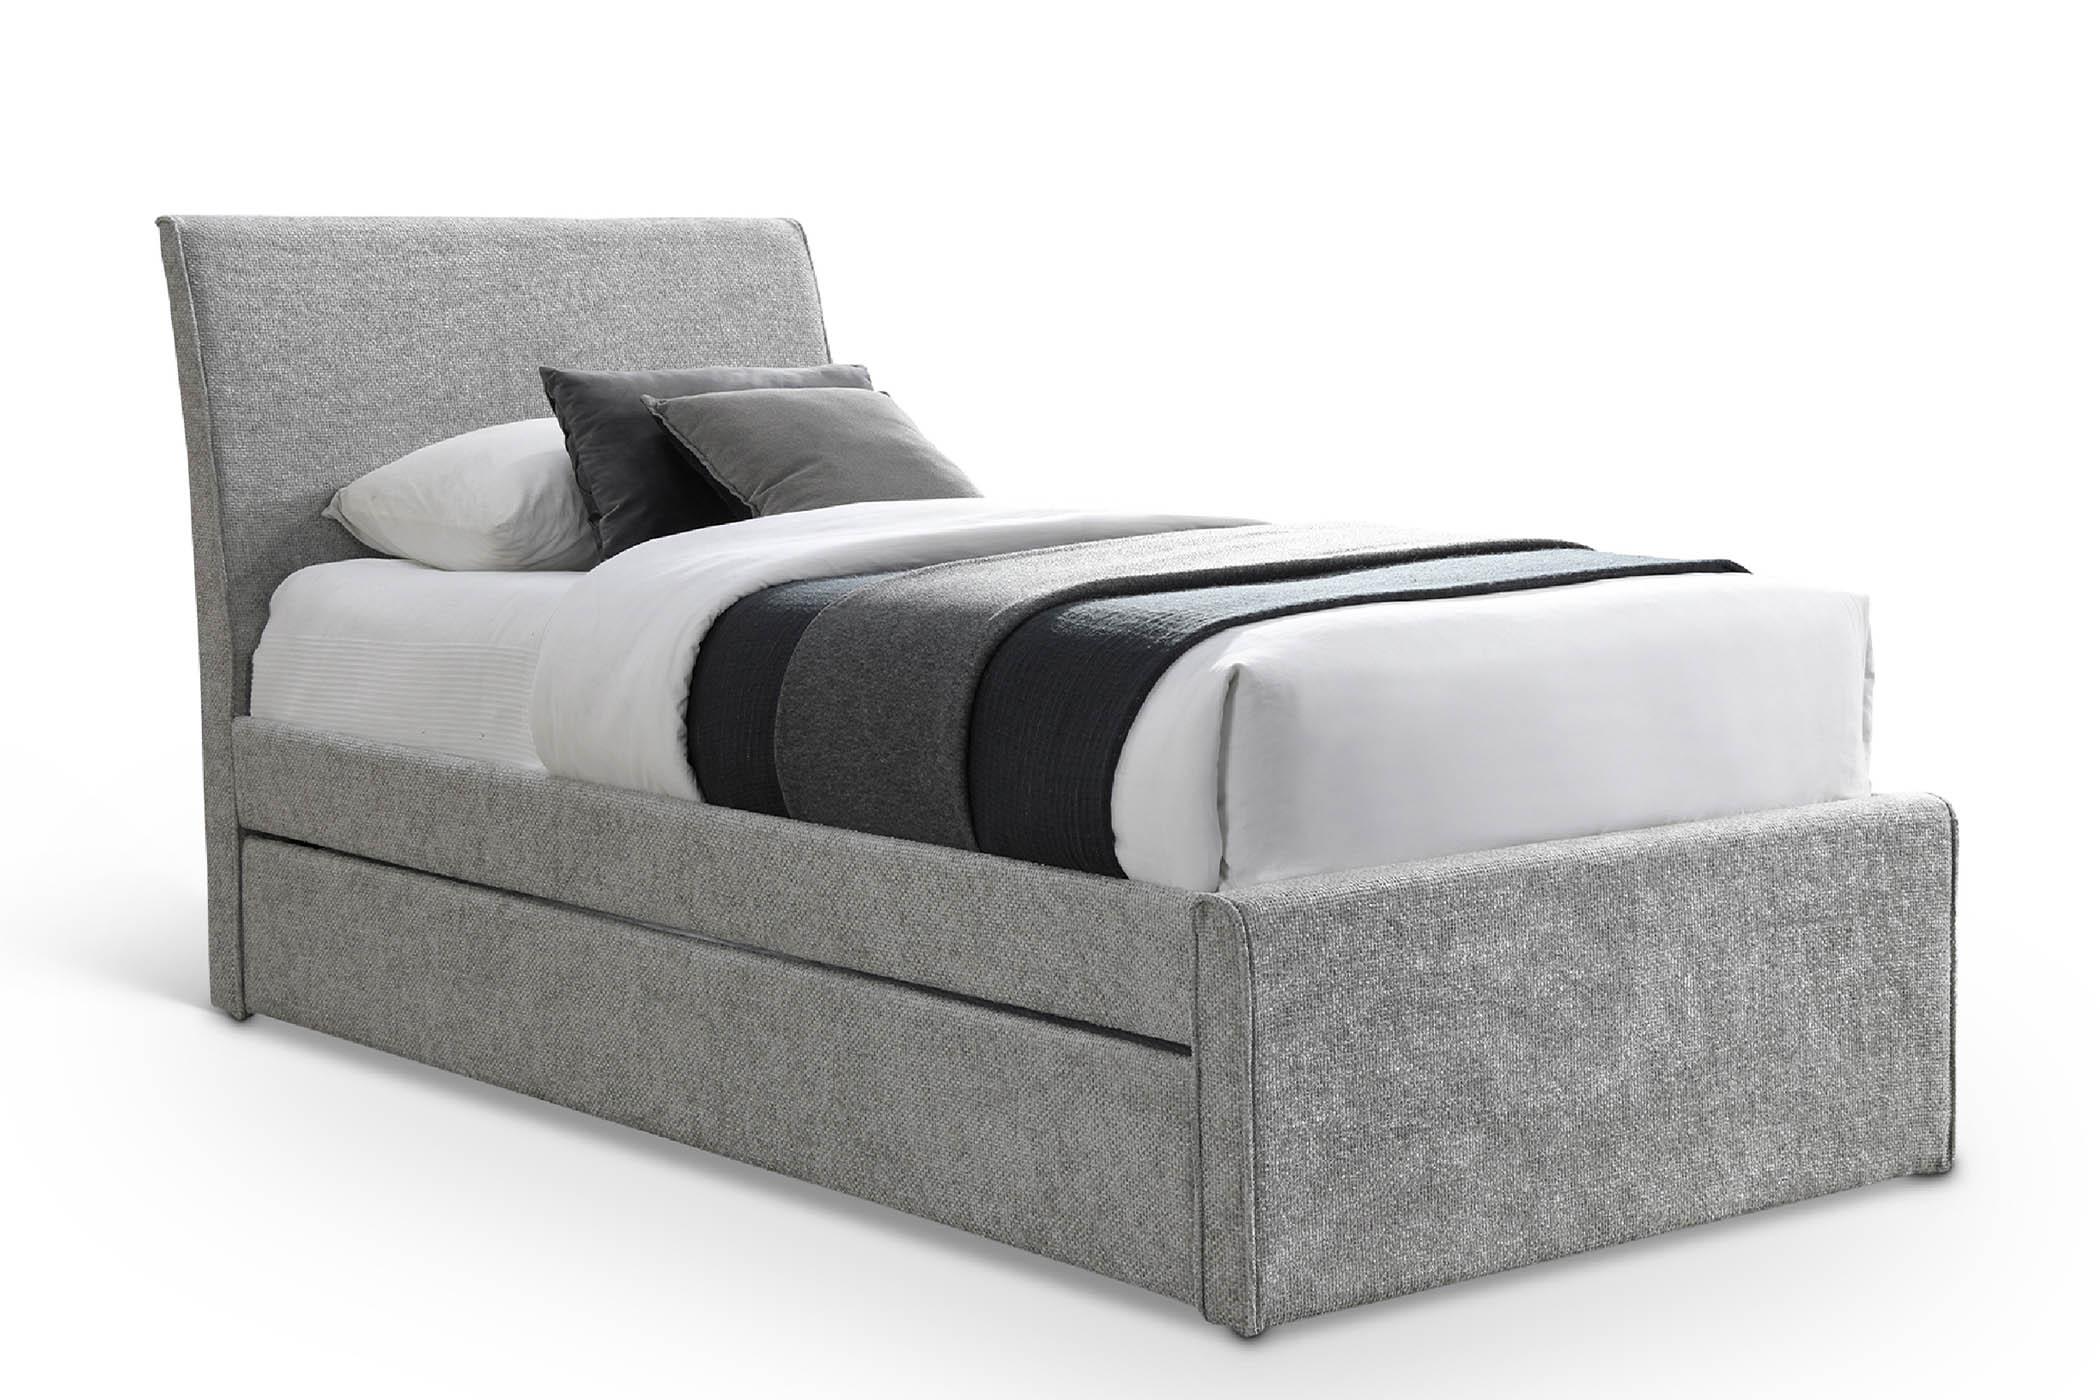 Contemporary, Modern Daybed MYLES B1262Grey-T B1262Grey-T in Gray Chenille